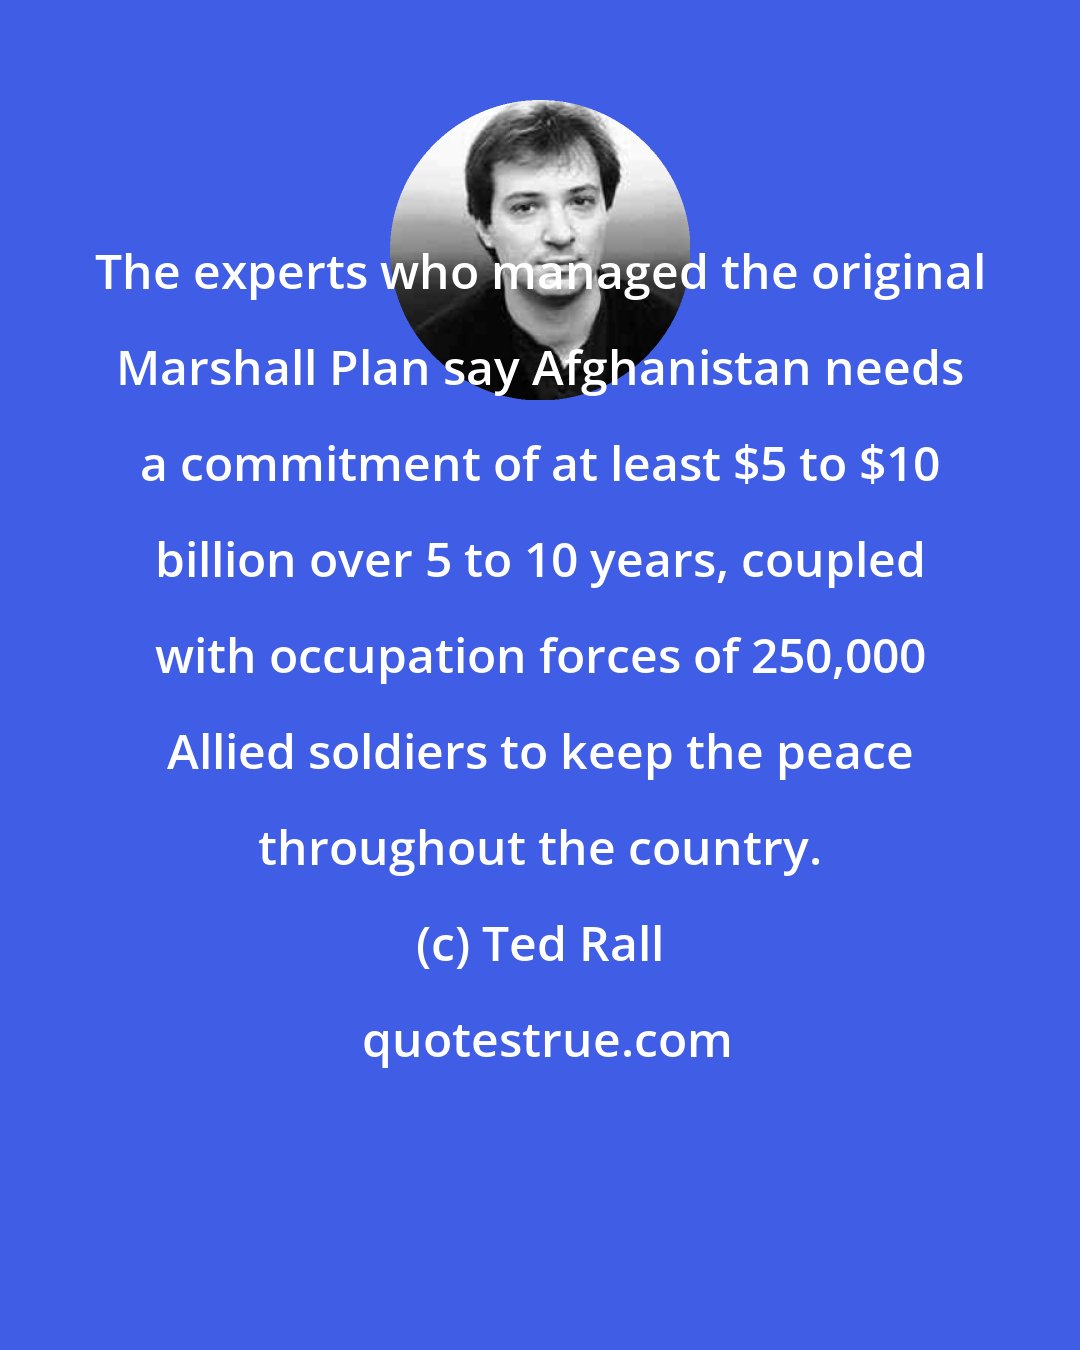 Ted Rall: The experts who managed the original Marshall Plan say Afghanistan needs a commitment of at least $5 to $10 billion over 5 to 10 years, coupled with occupation forces of 250,000 Allied soldiers to keep the peace throughout the country.